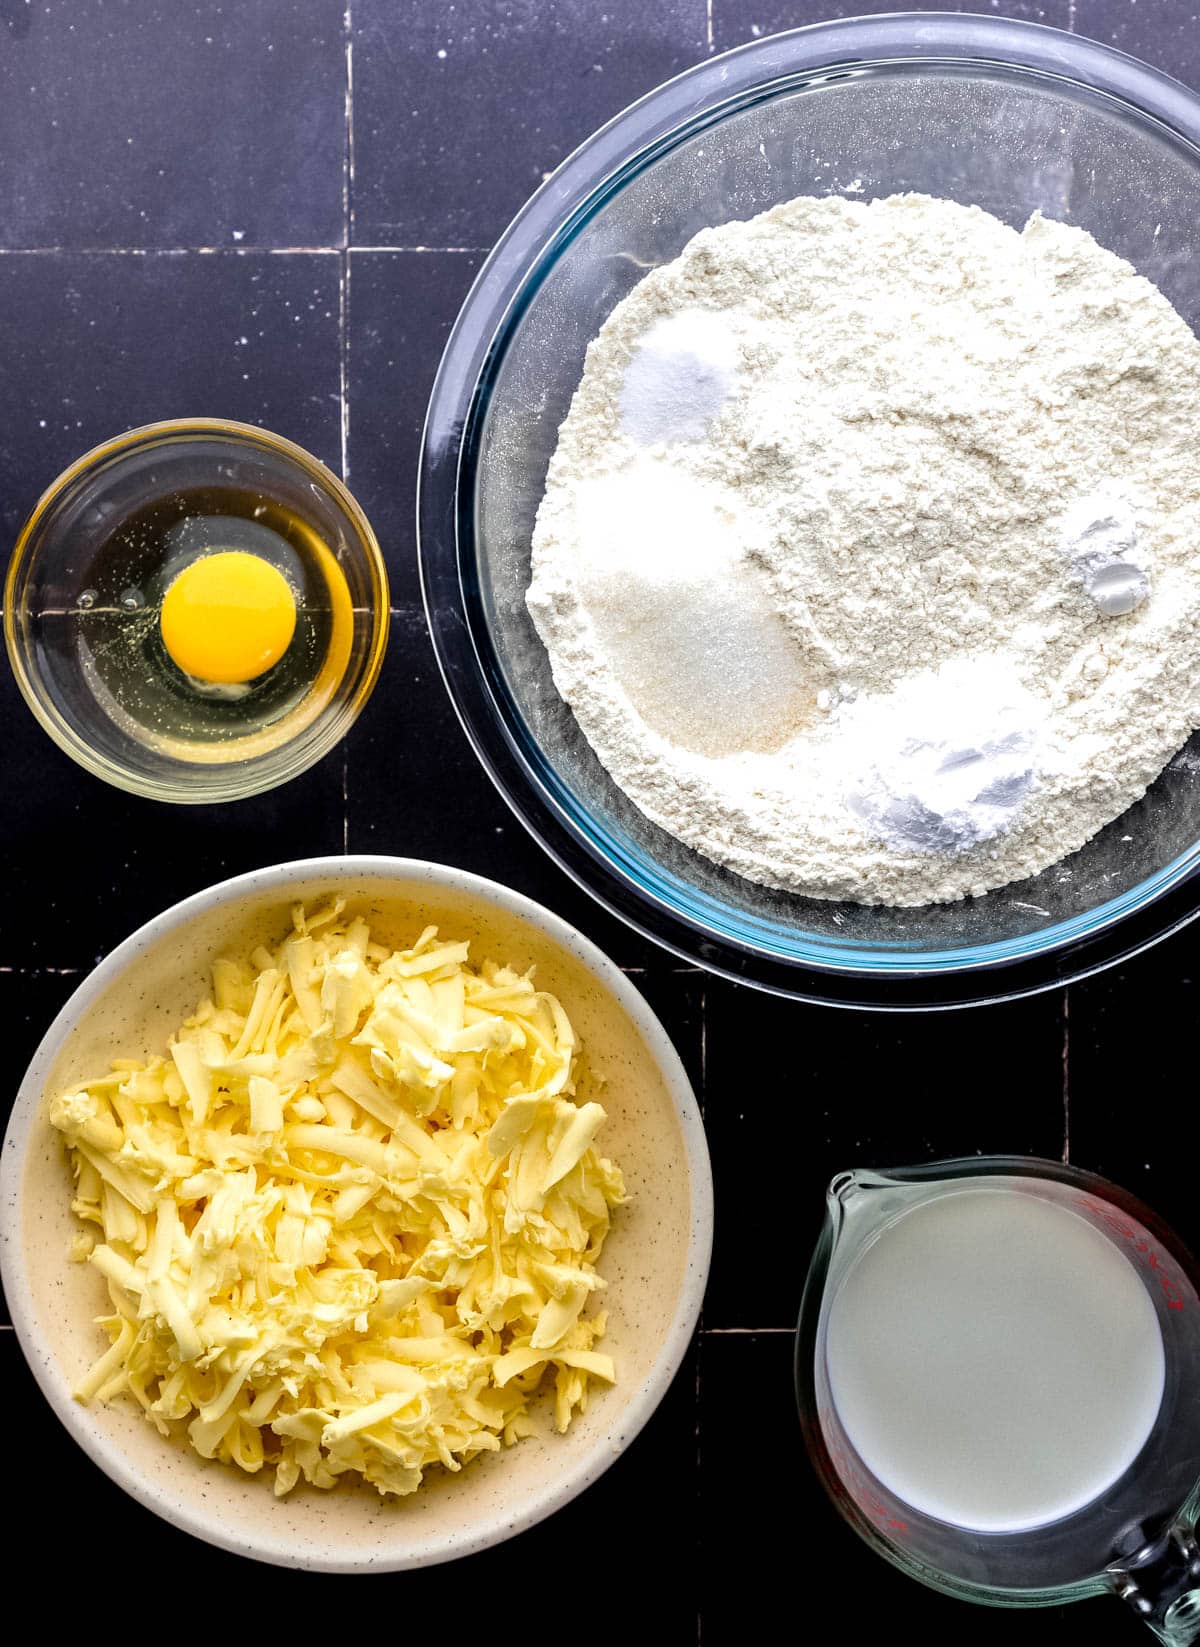 Overhead view of ingredients needed to make biscuits in separate bowls. 